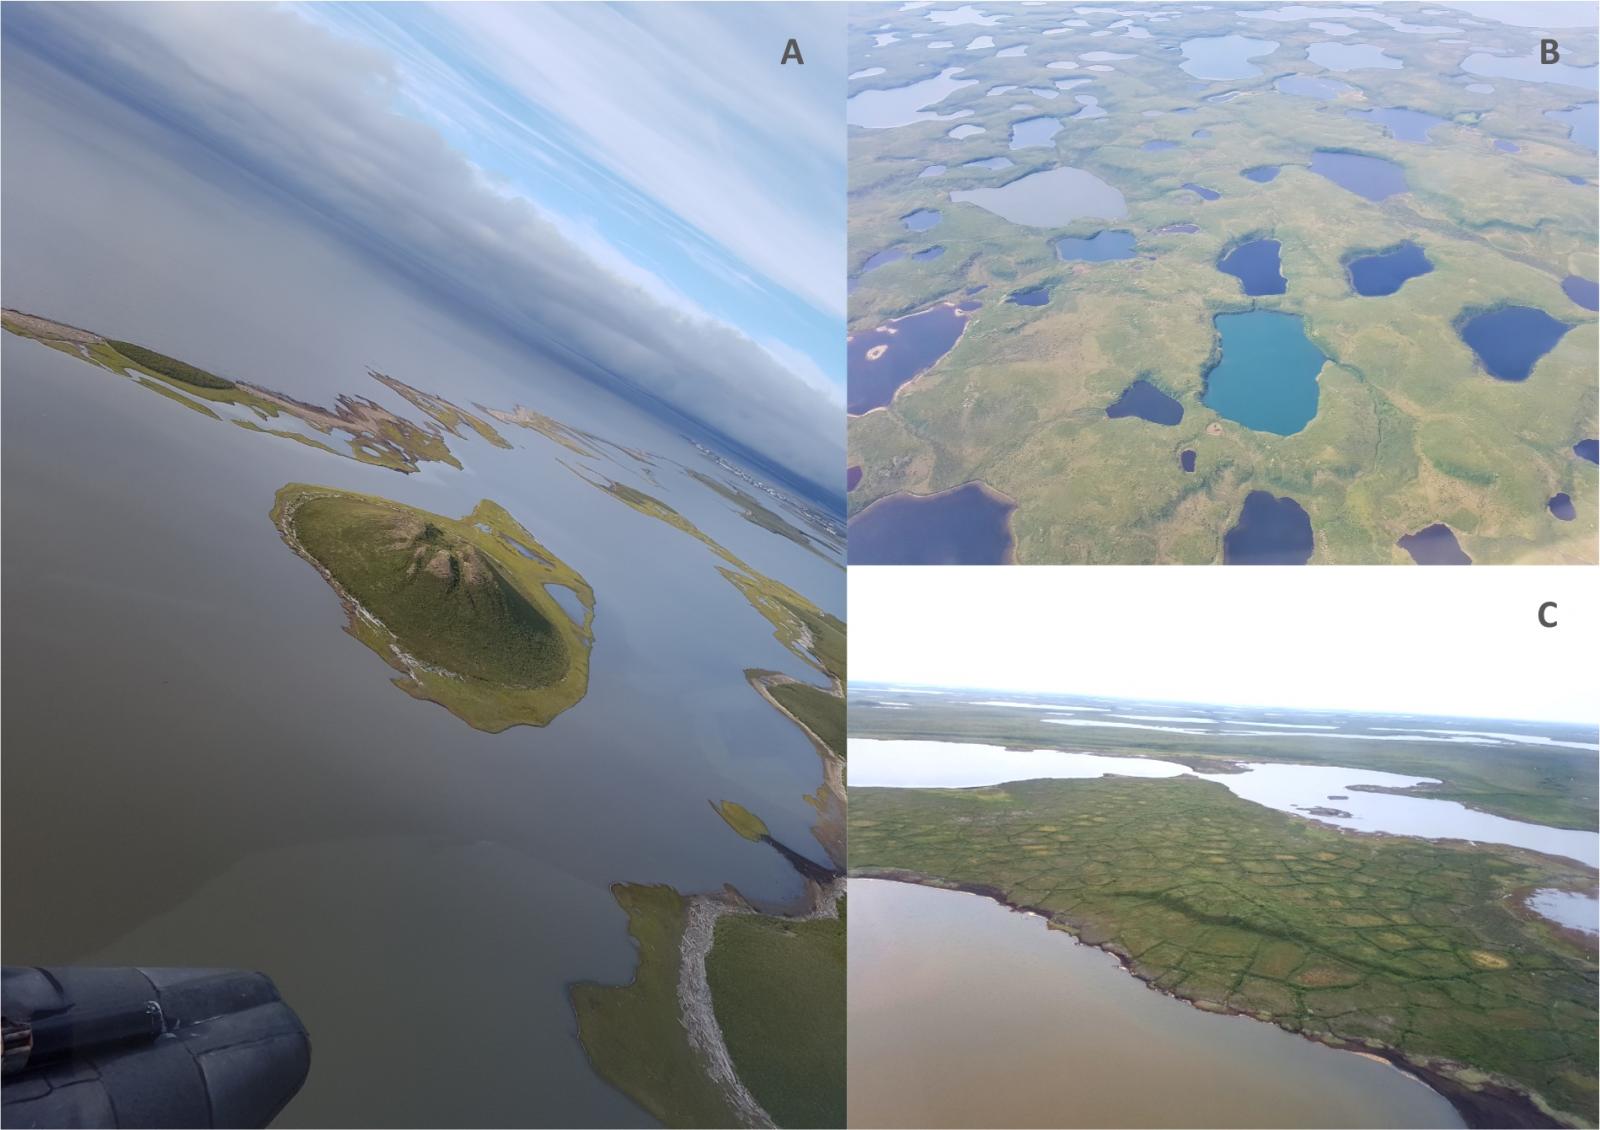 A Pingo near Tuktoyaktuk (A), colourful thermokarst lakes (B) and ice-wedge polygons or patterned ground (C)